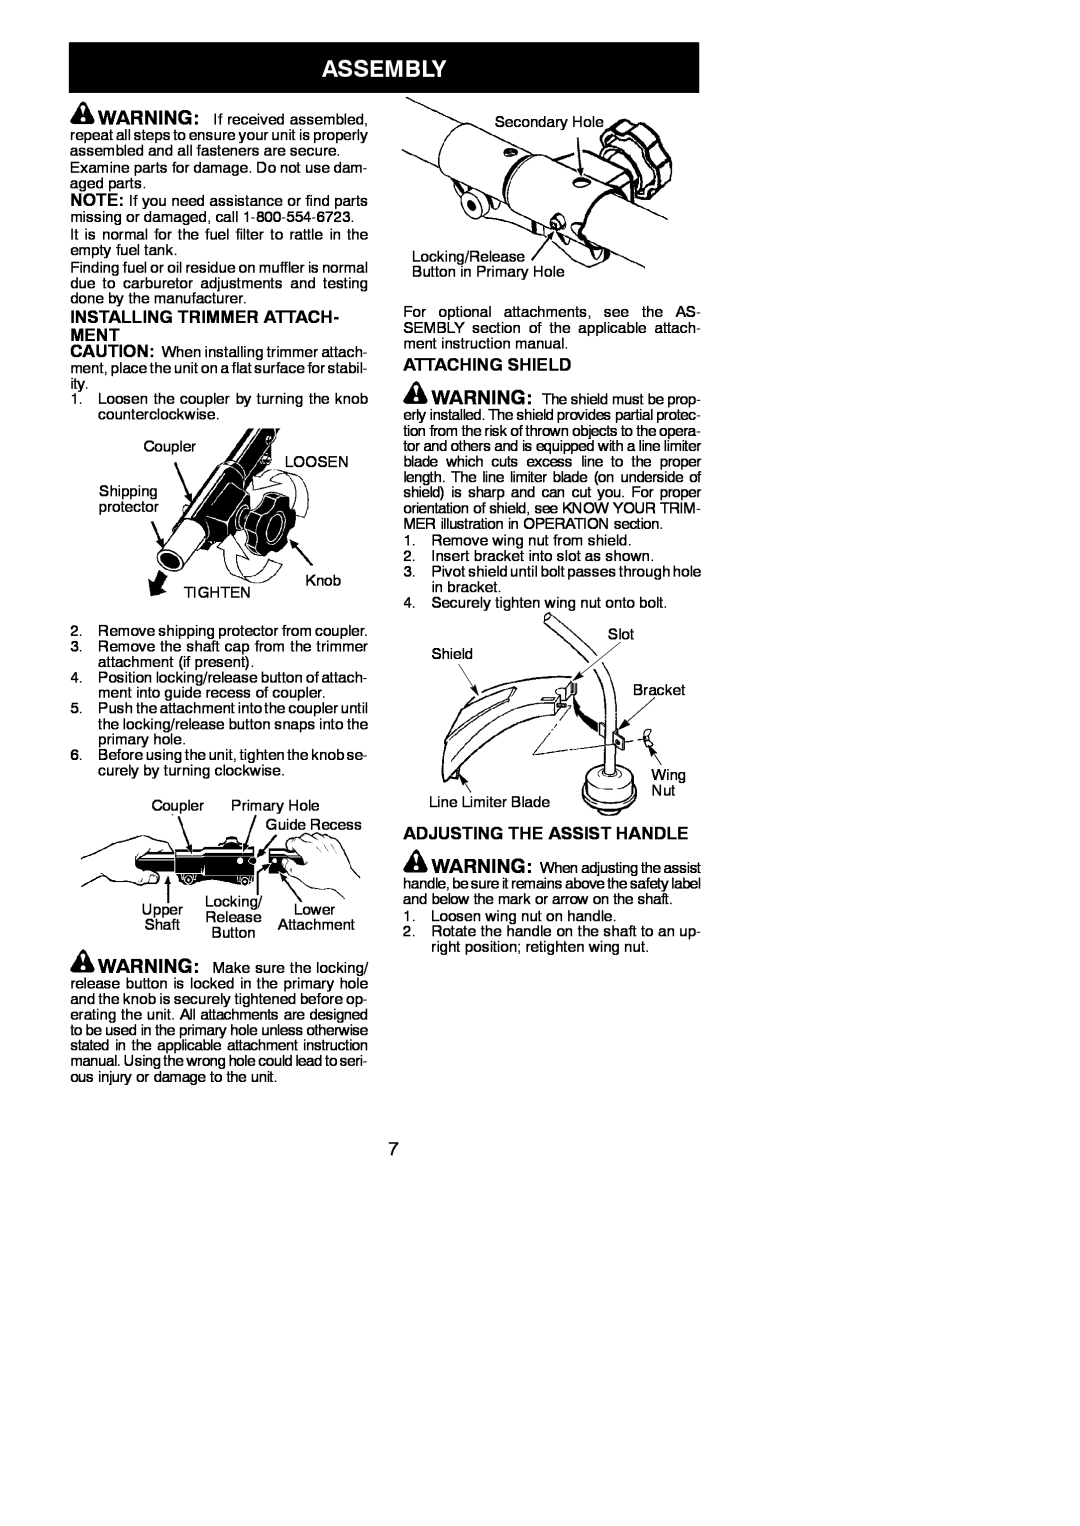 Poulan 545123423 Assembly, Installing Trimmer Attach- Ment, Attaching Shield, Adjusting The Assist Handle 